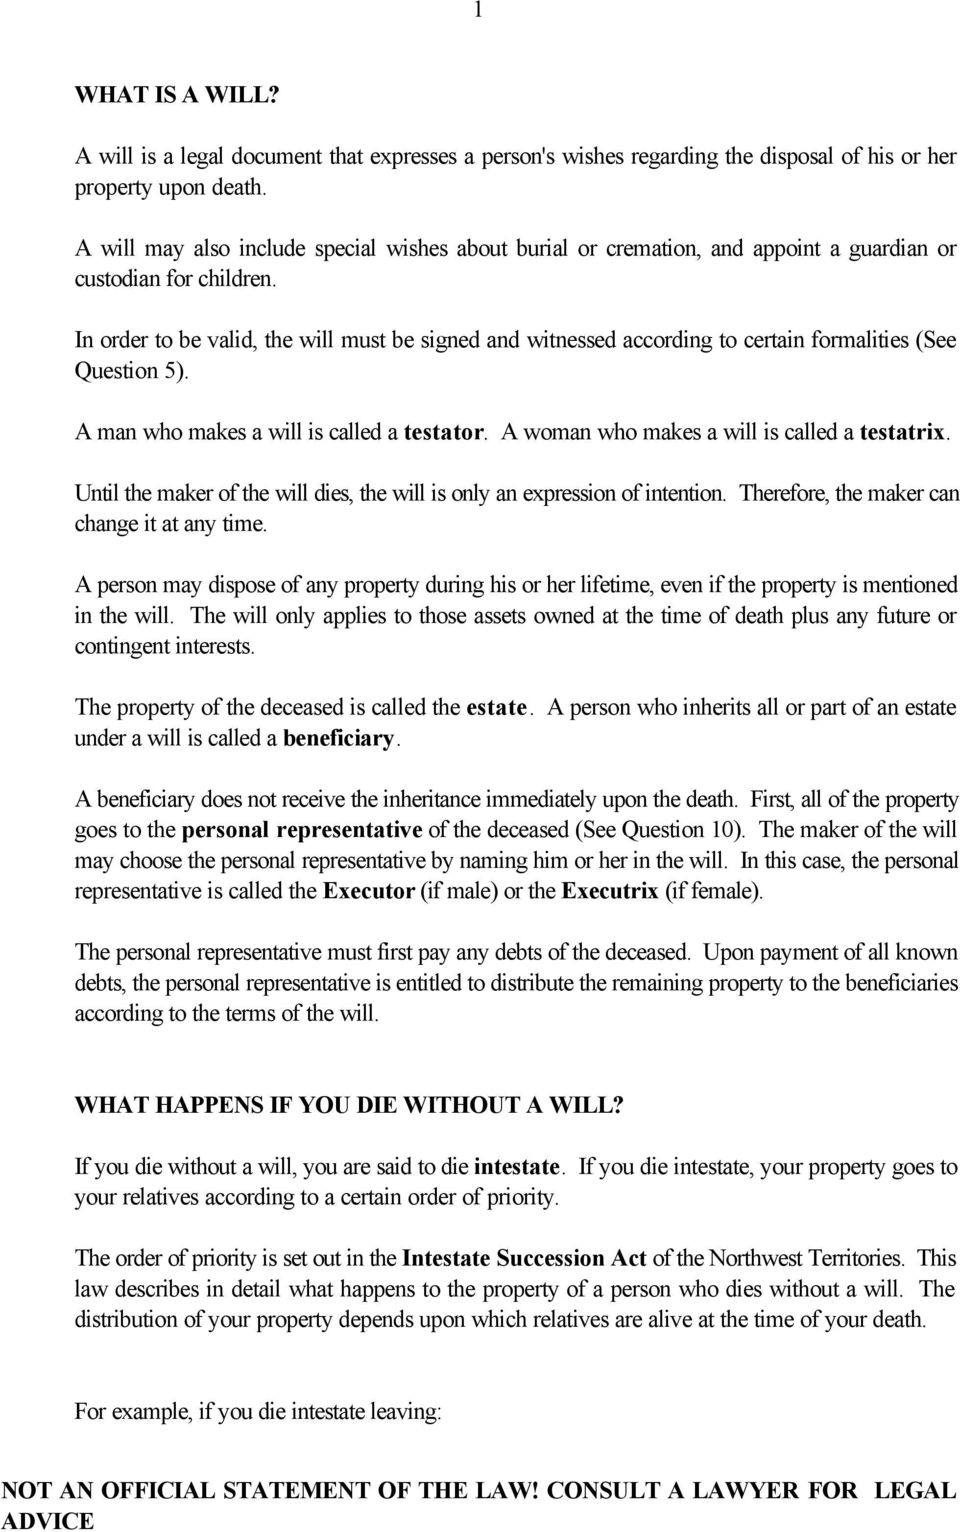 In order to be valid, the will must be signed and witnessed according to certain formalities (See Question 5). A man who makes a will is called a testator.